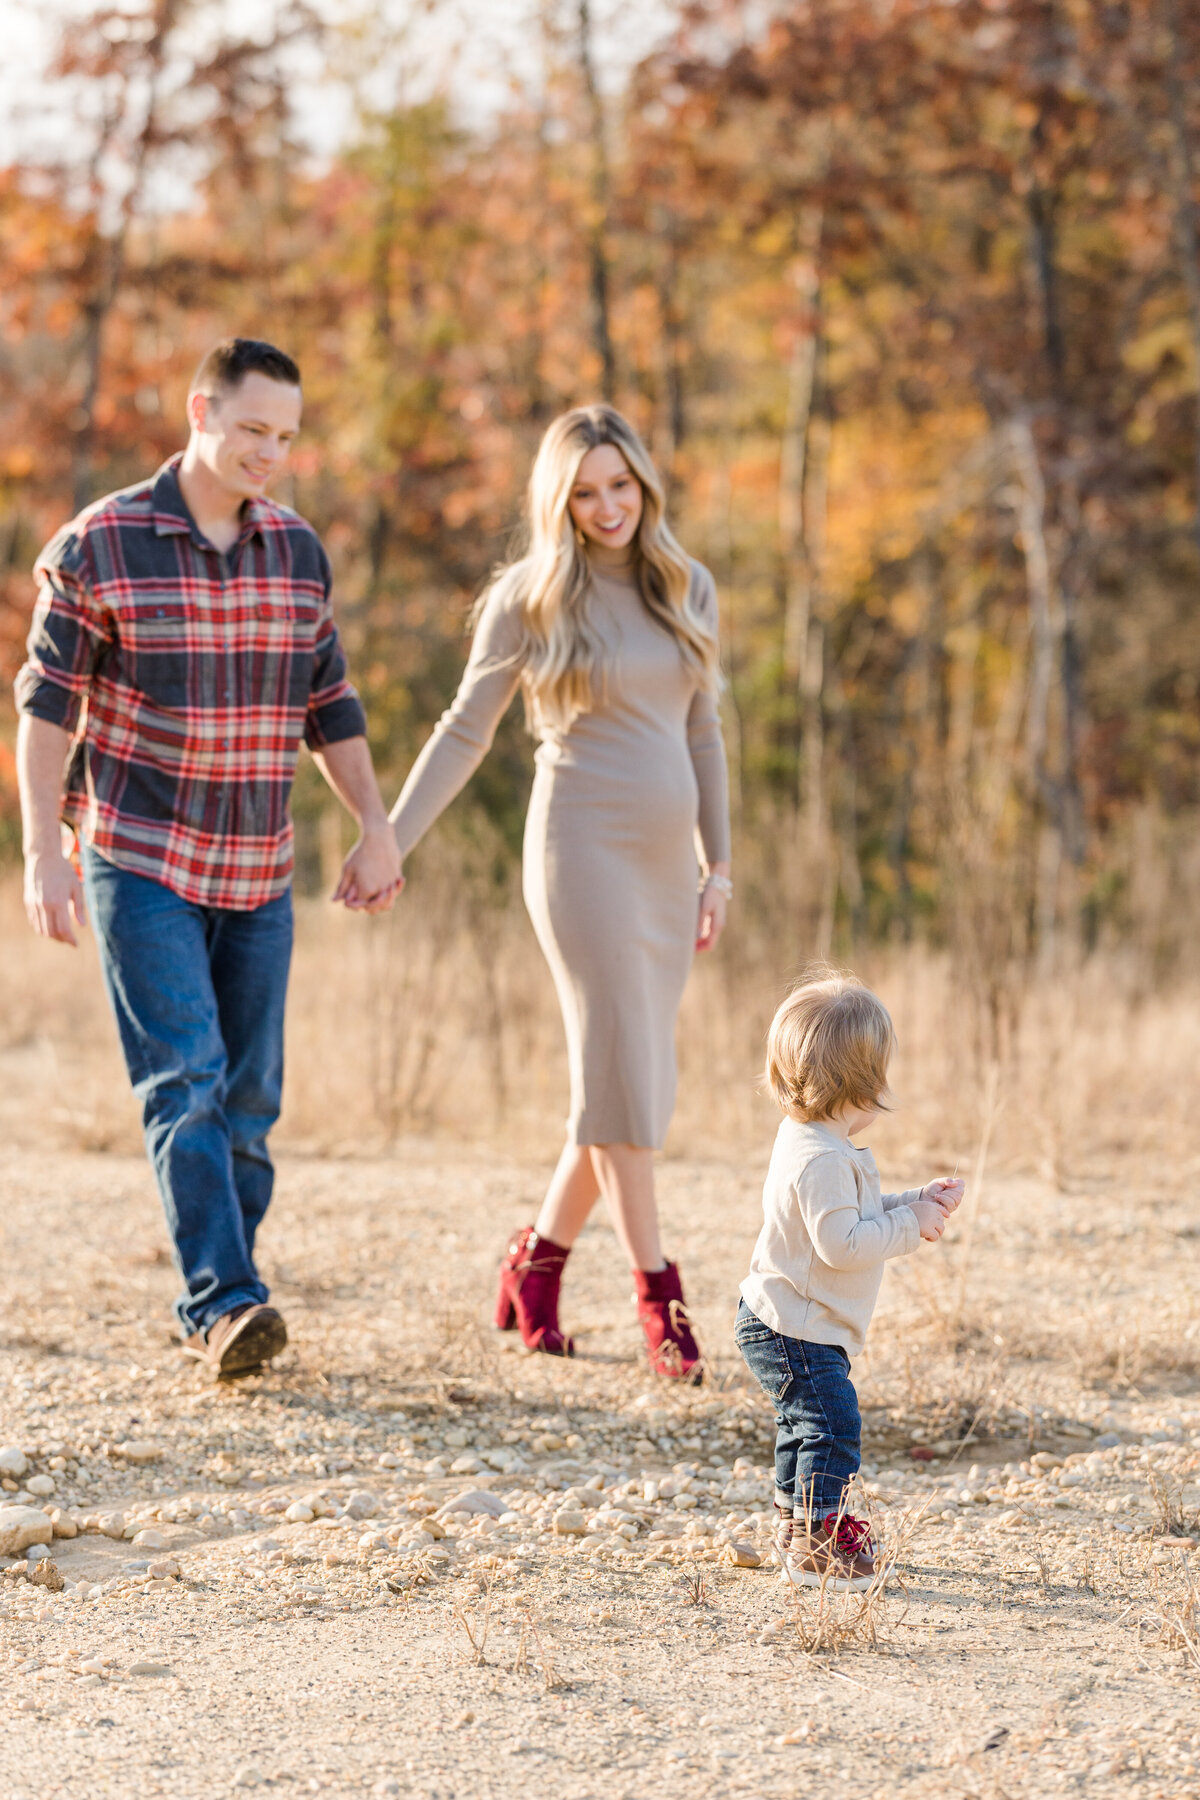 Kait & Dave Gender Reveal - Taylor'd Southern Events - Maryland Photographer -1835